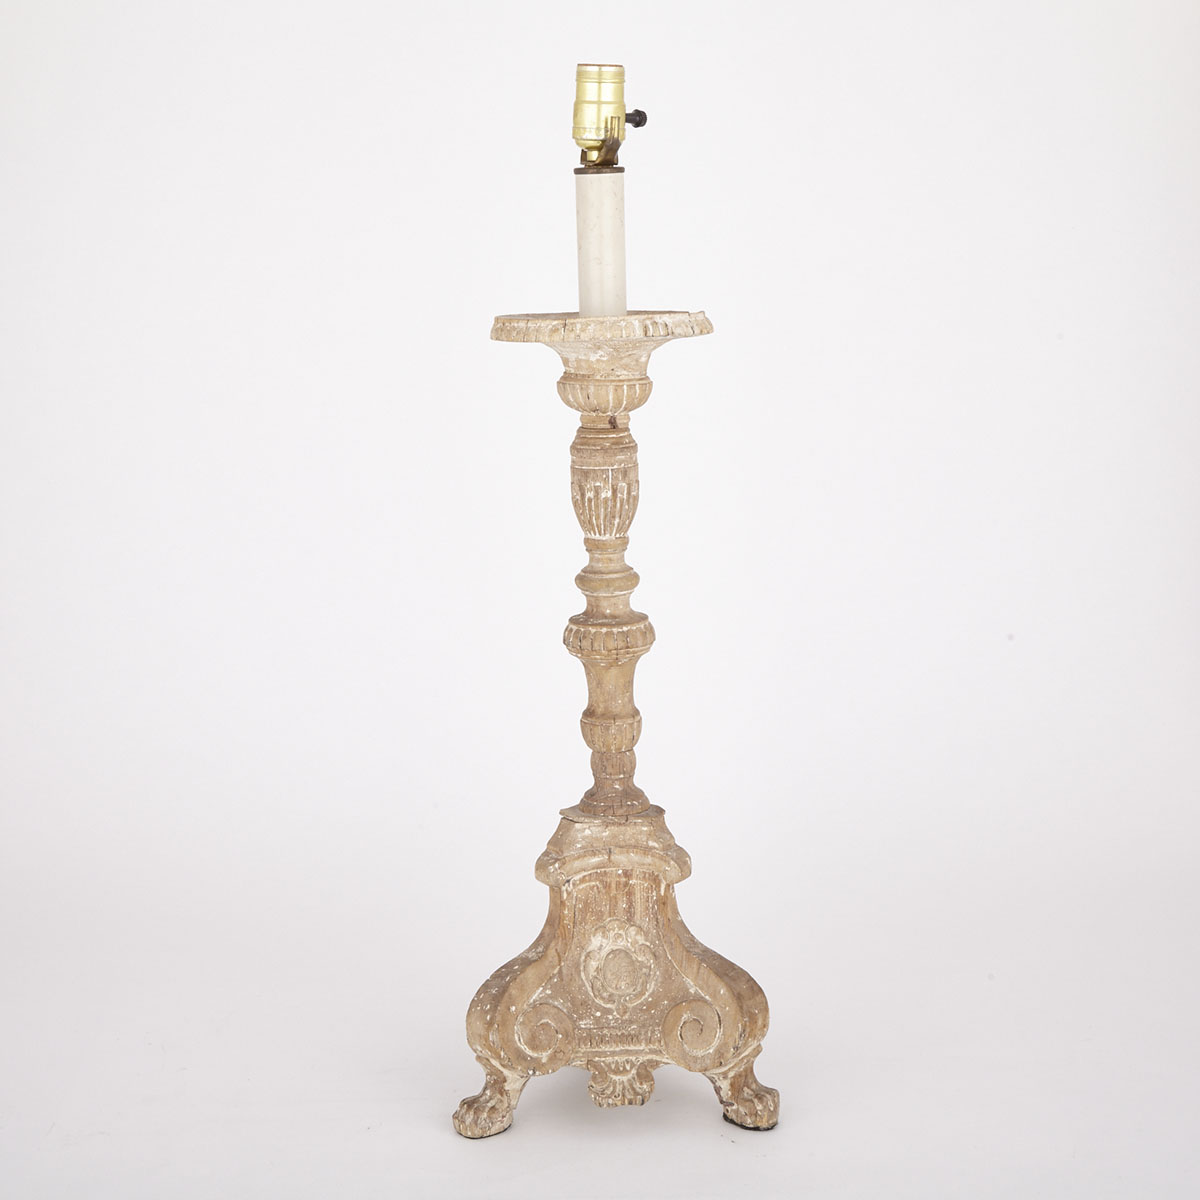 Italian Baroque Style Carved Pricket, late 18th/early 19th century